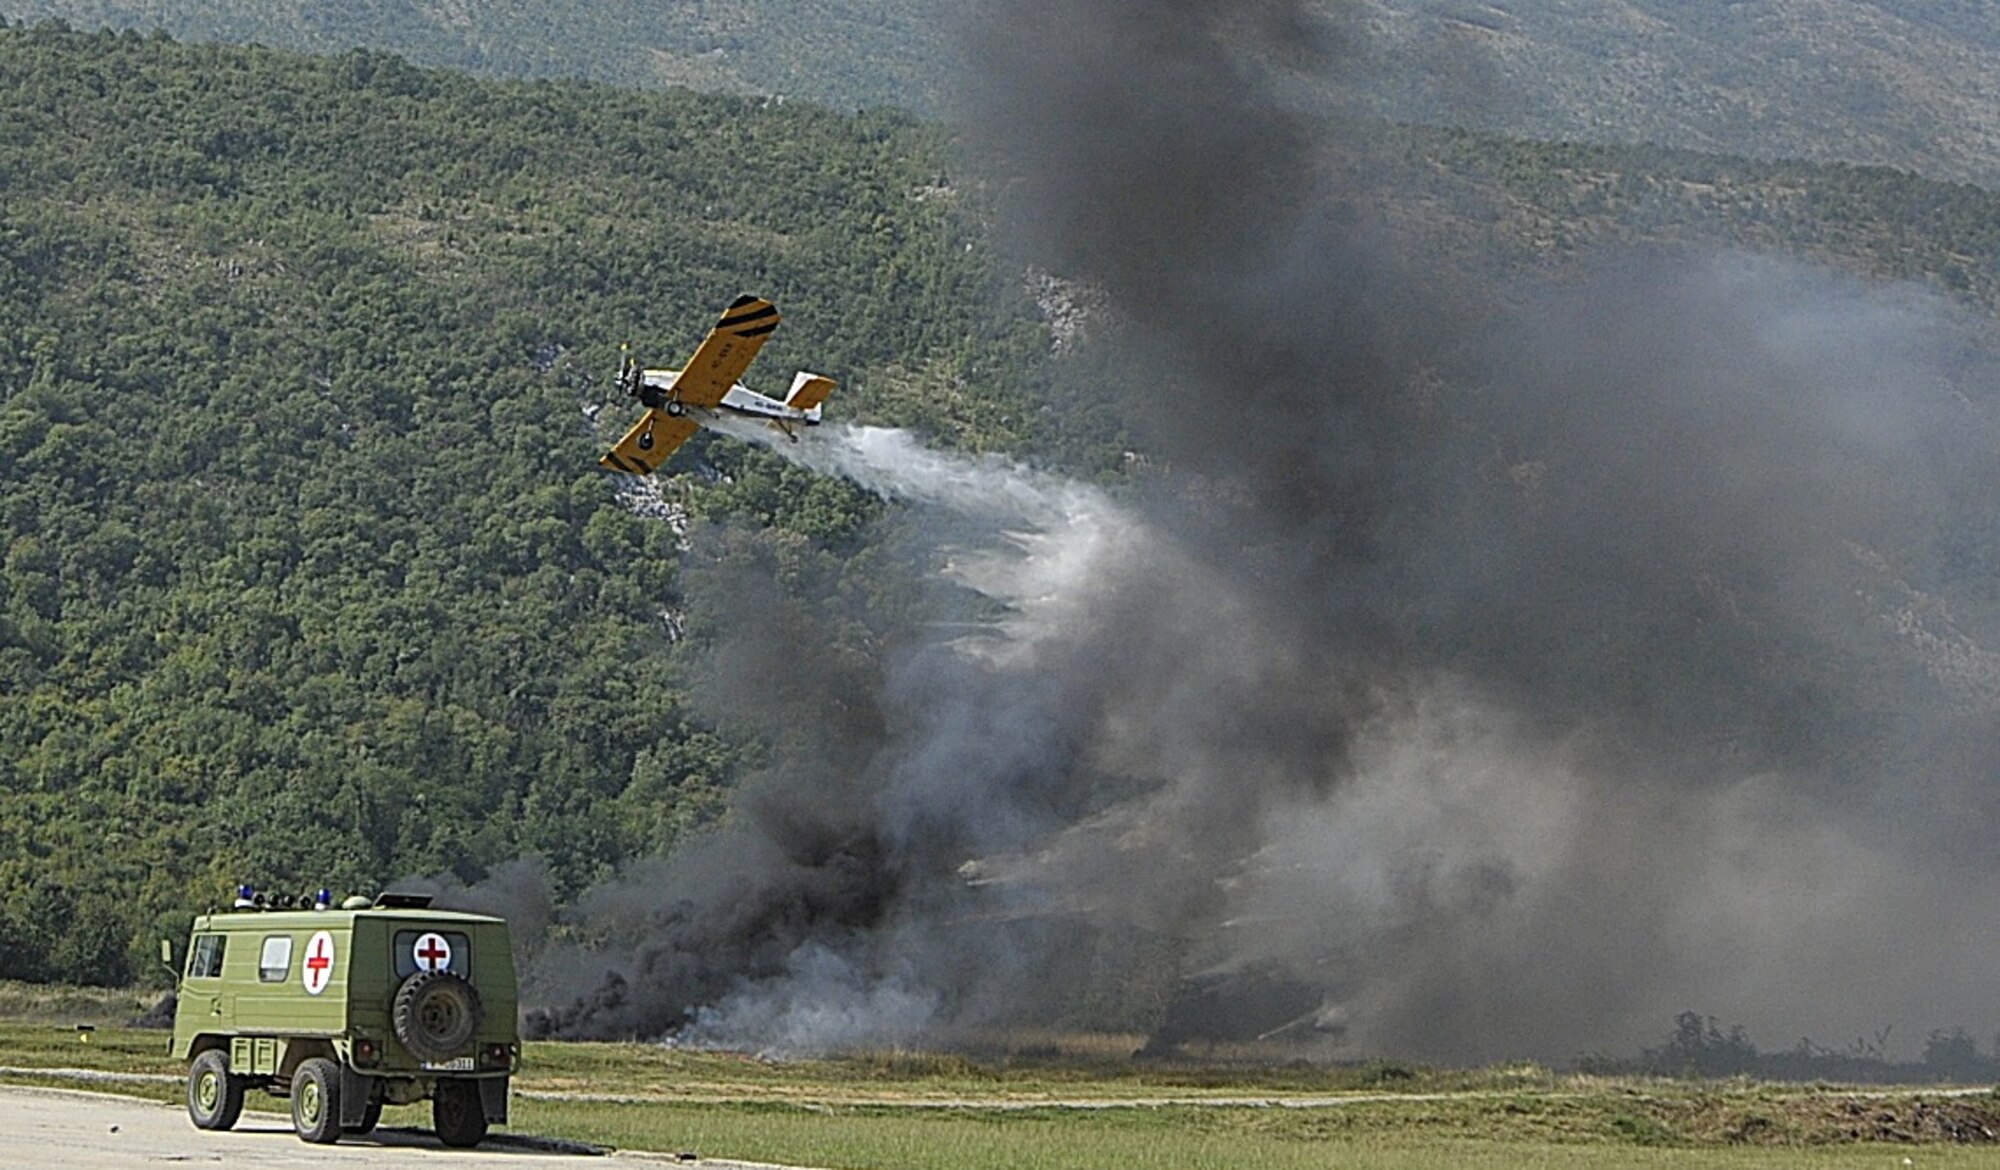 A Montenegrin airplane drops fire retardant on a mock bridge explosion fire -- a medical exercise demonstration that is part of MEDCEUR 10, a medical training exercise in central and eastern Europe, at Danilovgrad Army Base, Montenegro, Sept. 17. The scenario, along with four others, was shown to government ministers, flag officers and other honored guests during visitors day. For more information, go to www.usafe.af.mil/medceur.asp and www.odbrana.gov.me. (U.S. Air Force photo/Airman 1st Class Tiffany Deuel)